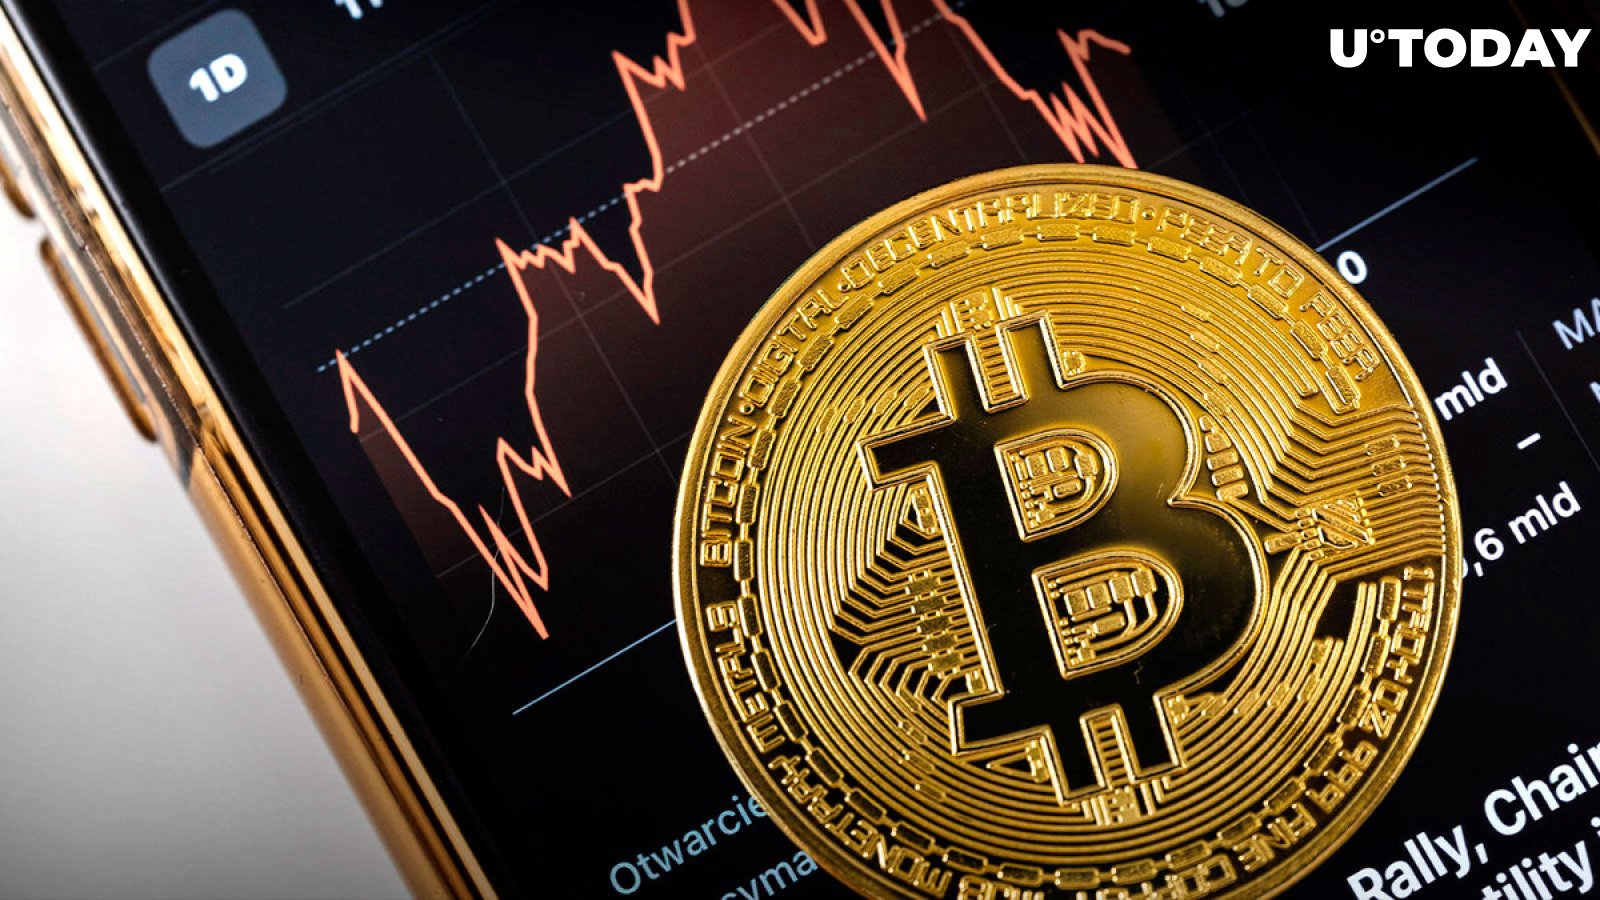 Top Analyst Predicts Bitcoin (BTC) Price to $220K Pre-Halving